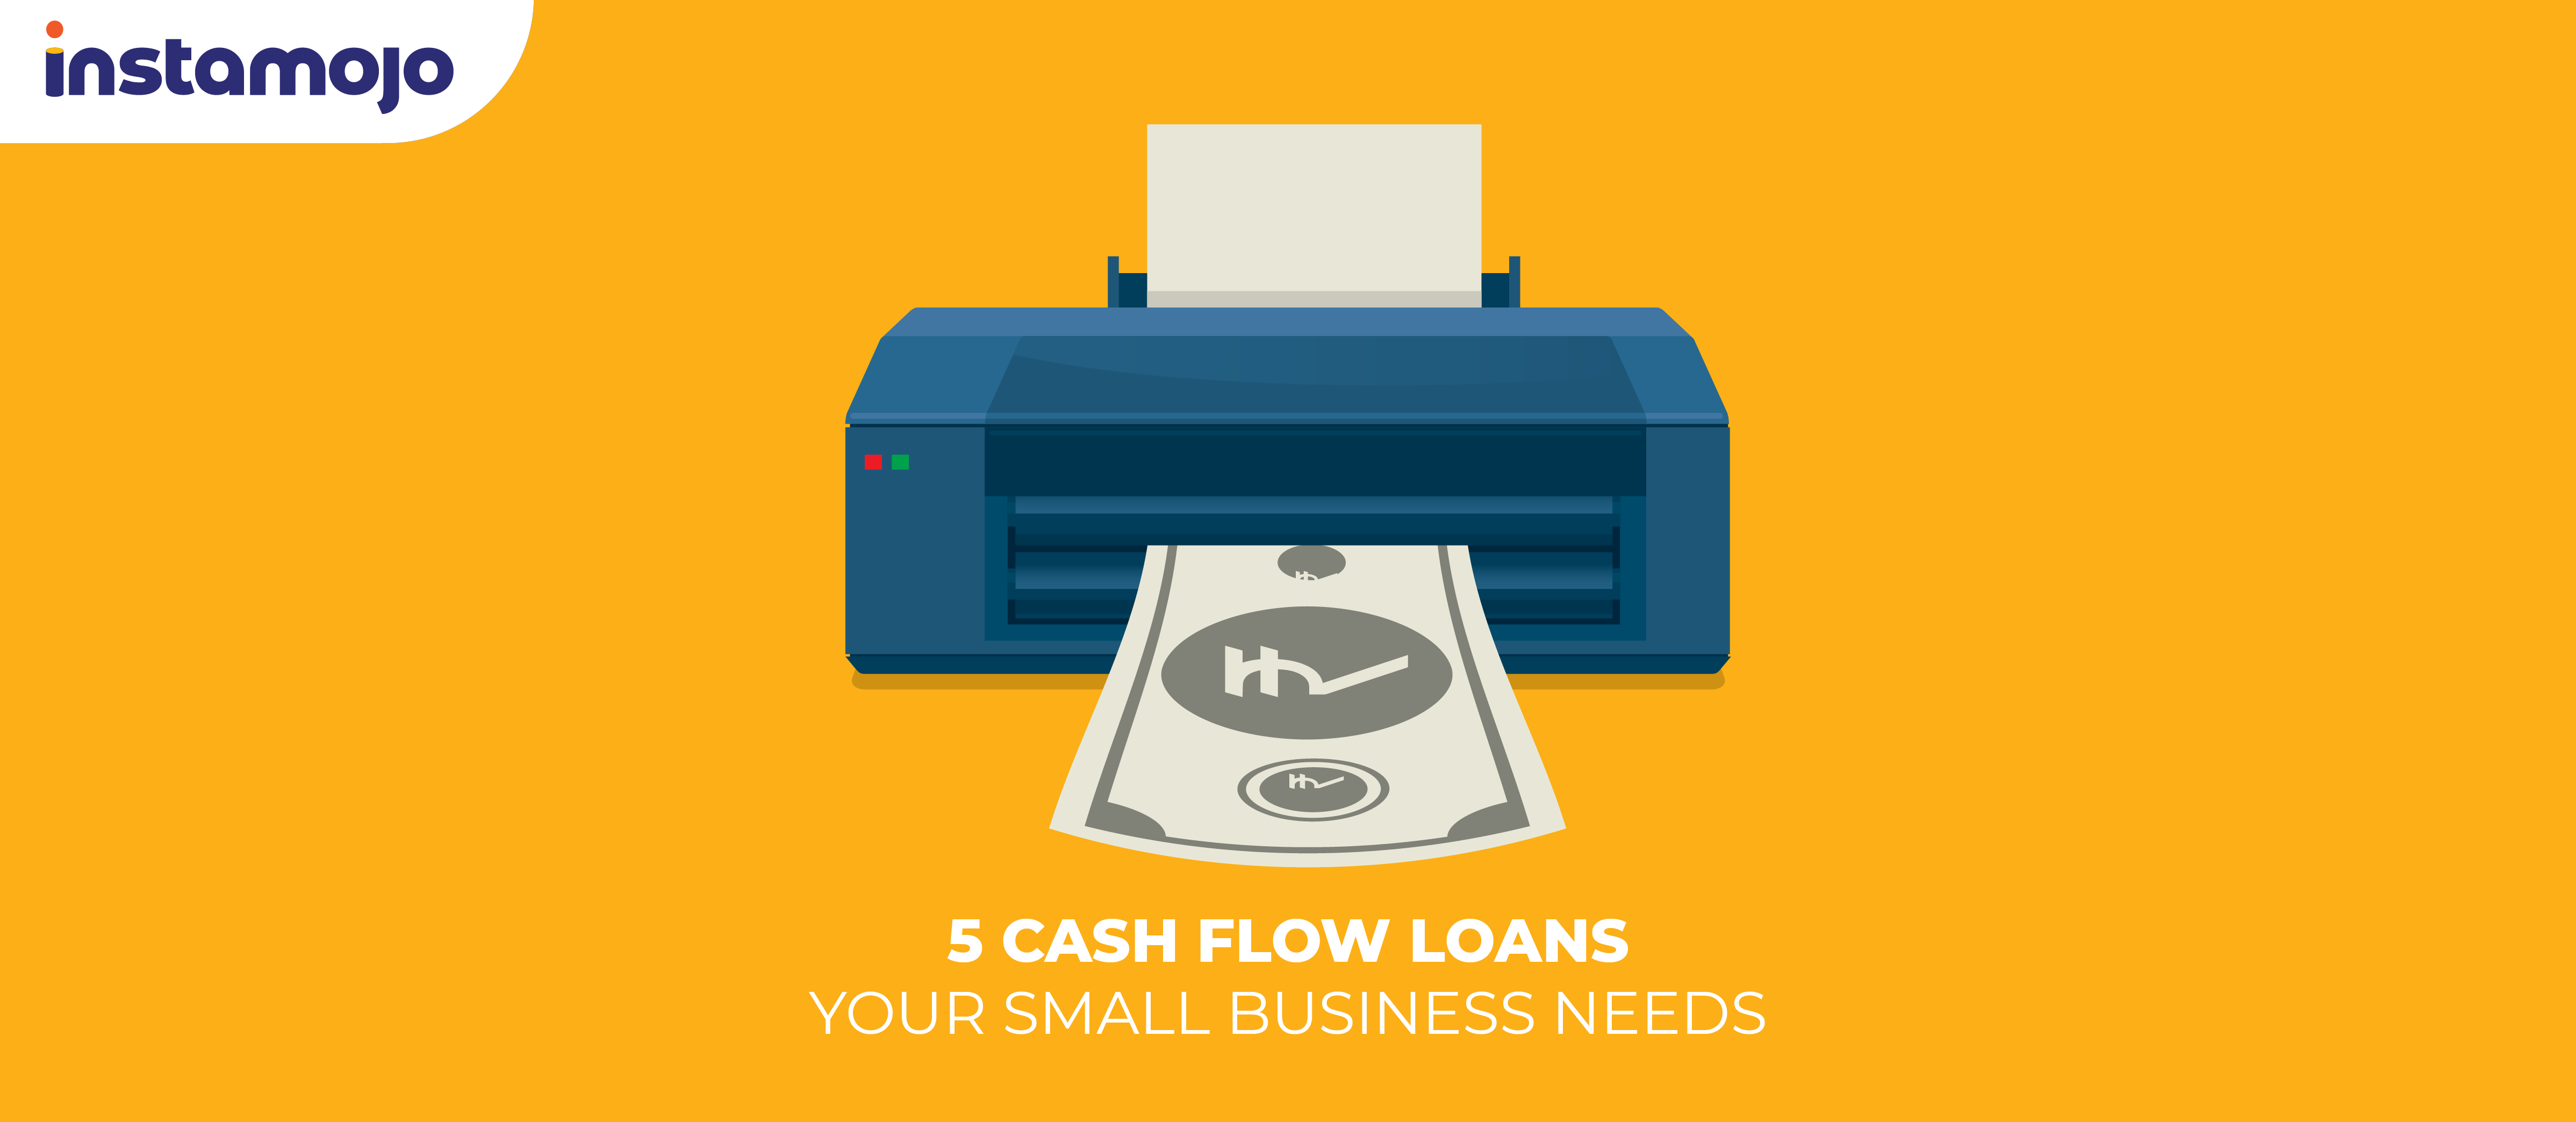 5 types of cash flow loans for small businesses